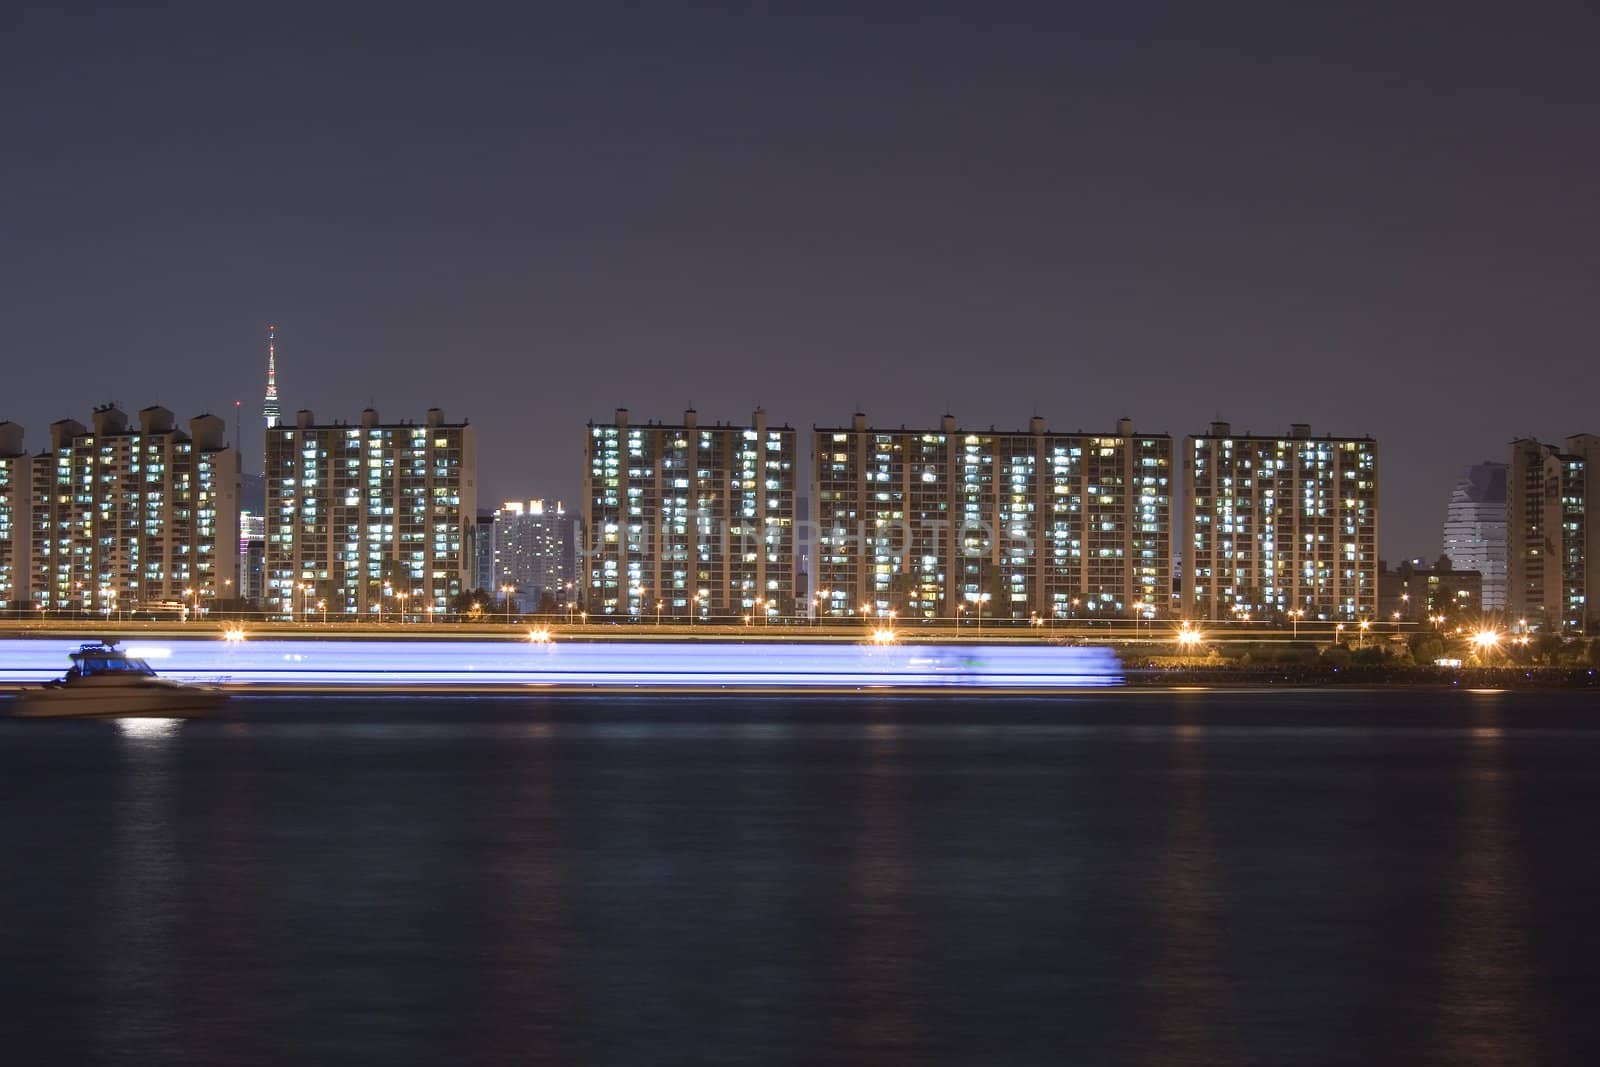 Beautiful lights on apartments relects on the river han in Seoul Korea- with passing ship in motion blur